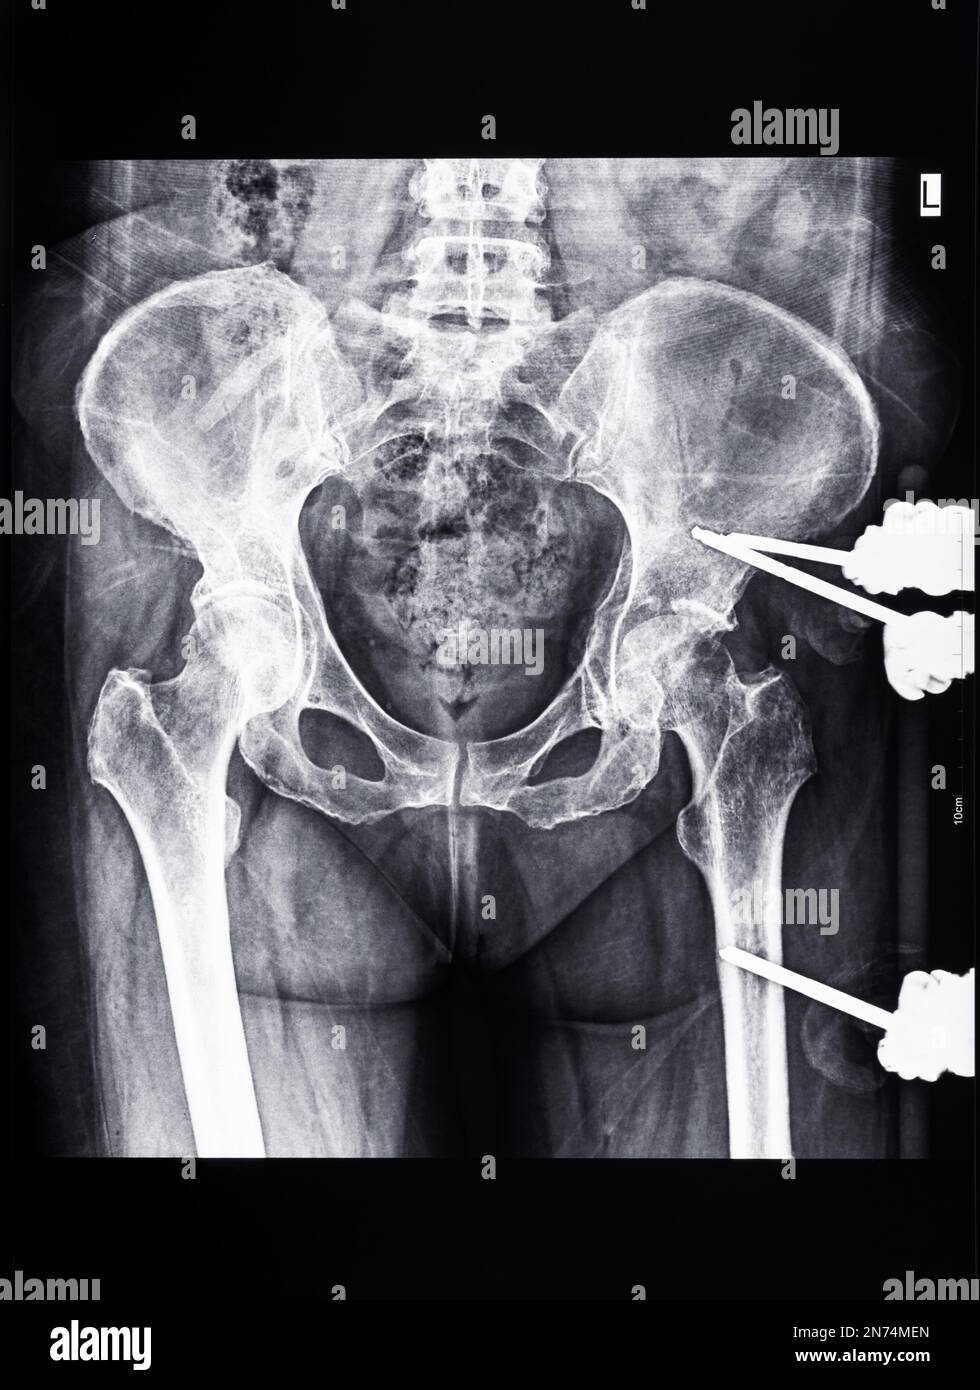 x-ray of pelvic with external fixation device fixed in femur and pelvic bones Stock Photo